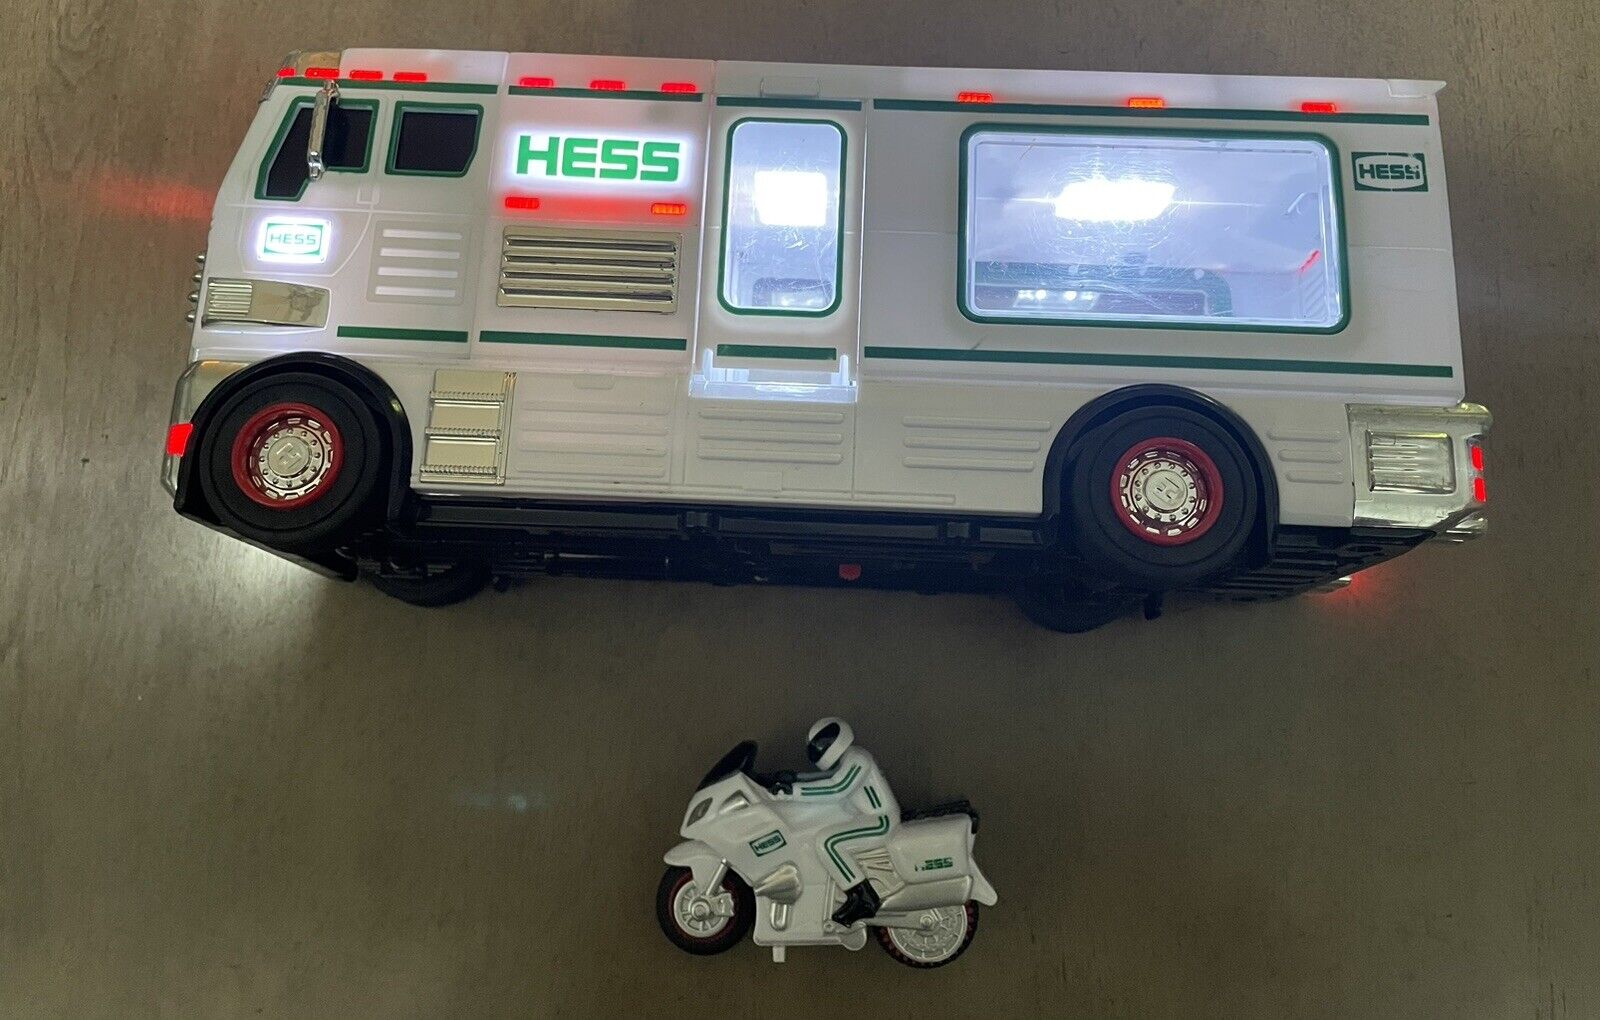 HESS 2018 RV Bus with Motorcycle